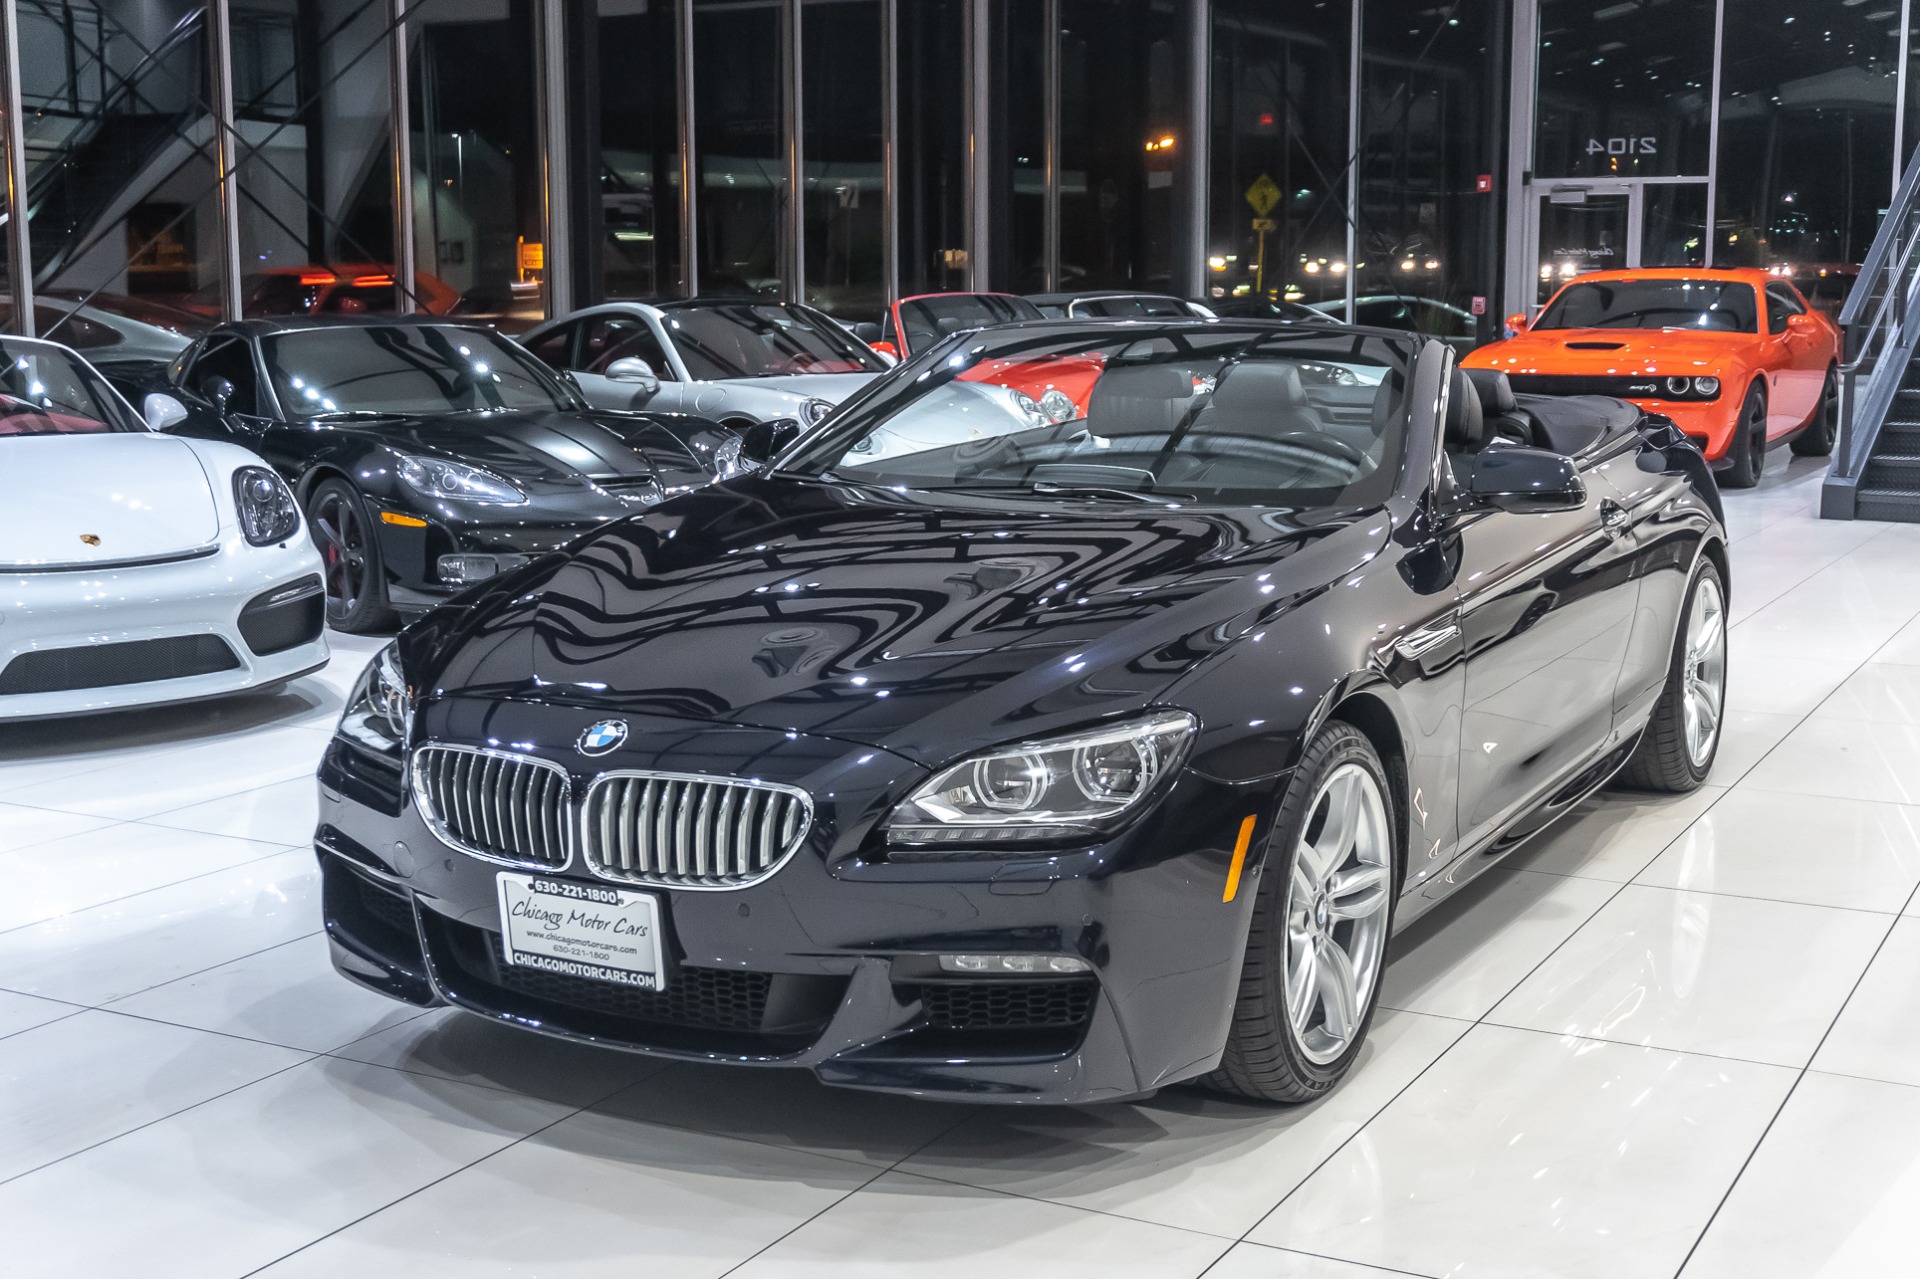 Used 2014 BMW 650i xDrive M-Sport Convertible MSRP $103K+ EXECUTIVE  PACKAGE! For Sale (Special Pricing) | Chicago Motor Cars Stock #16264A